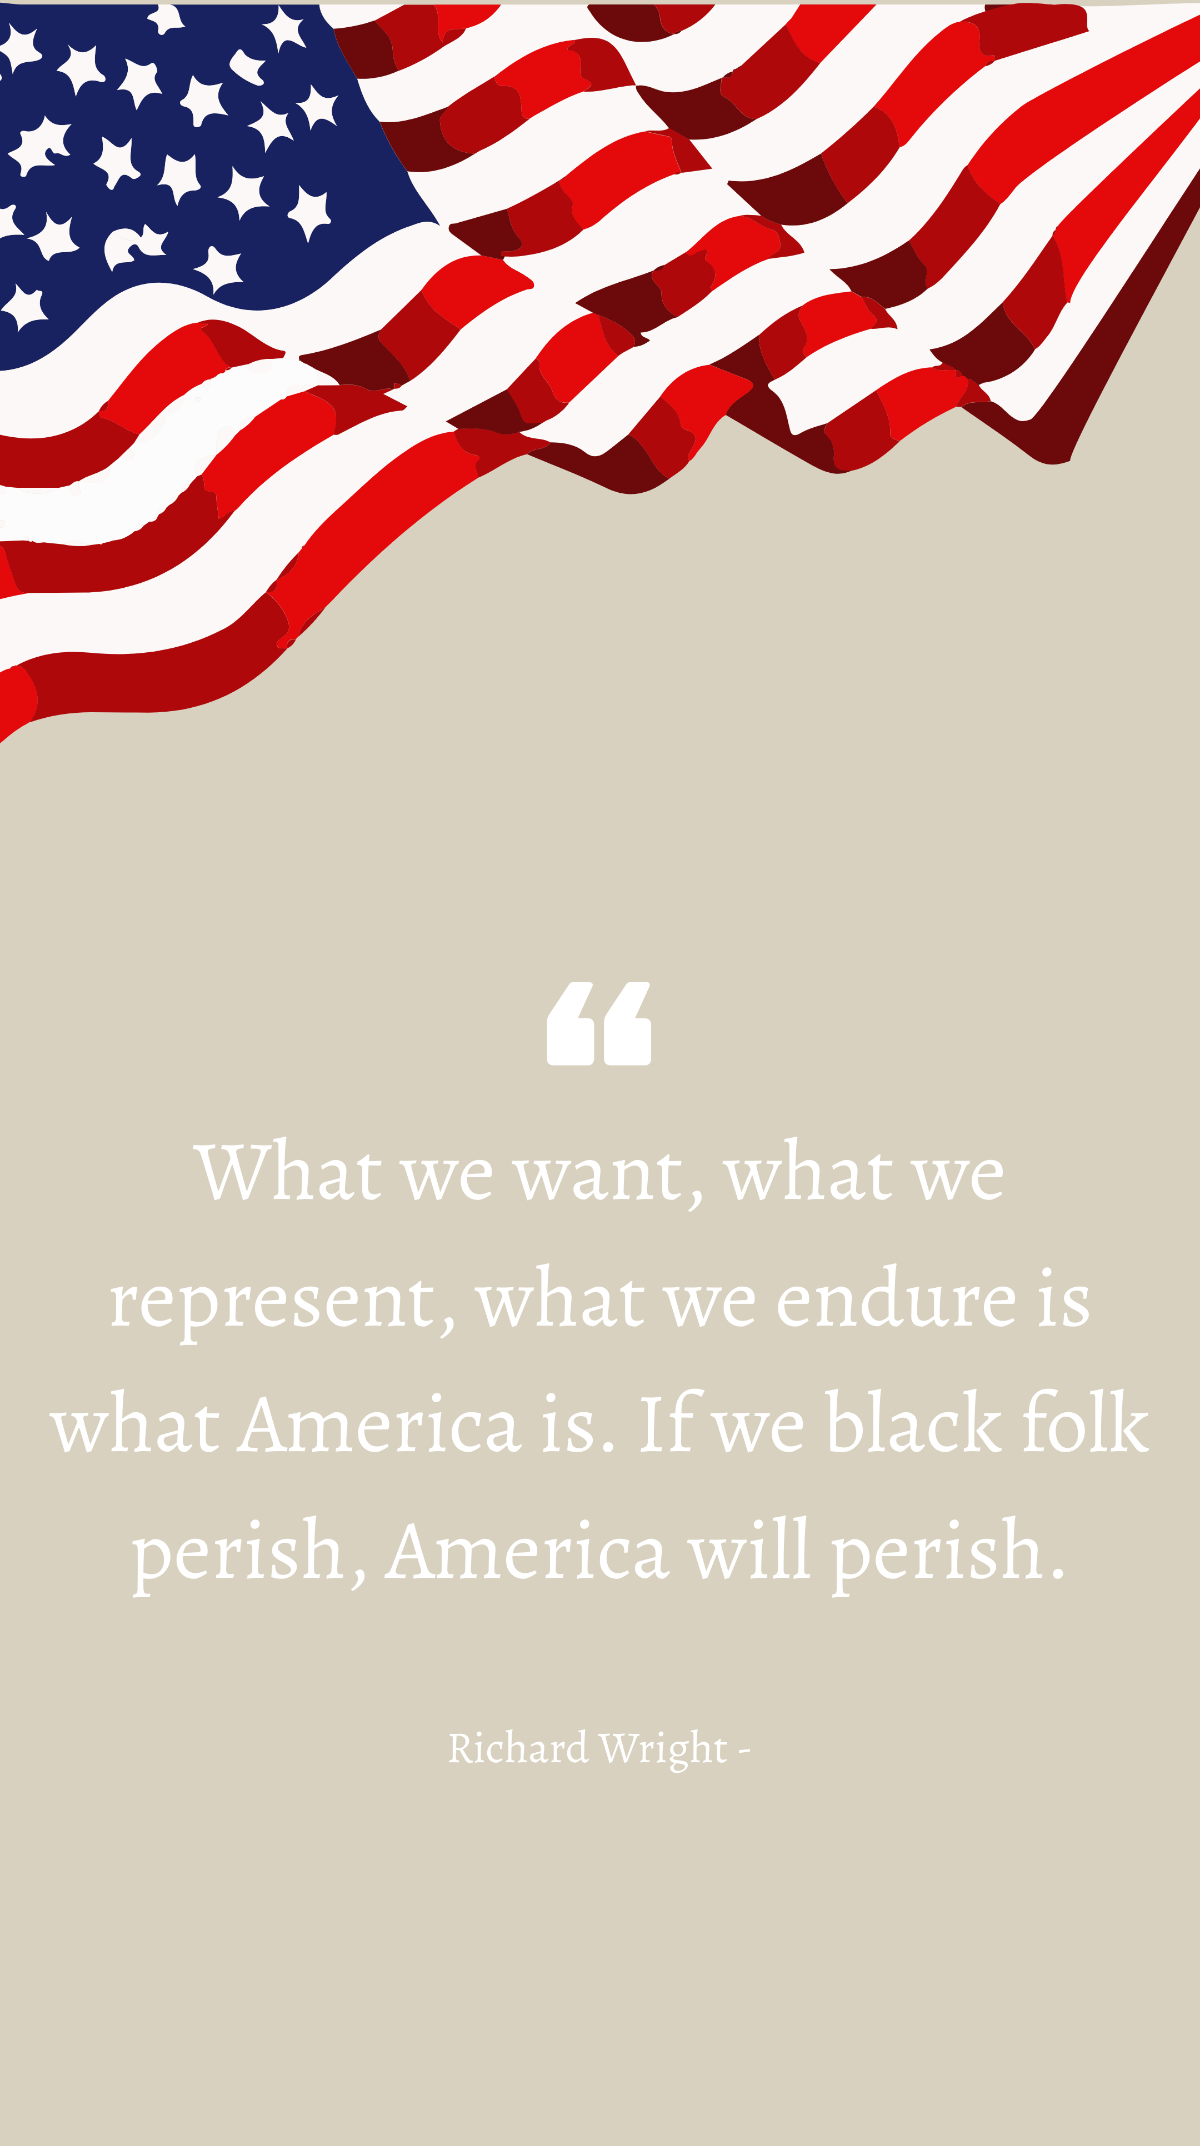 Richard Wright - What we want, what we represent, what we endure is what America is. If we black folk perish, America will perish. Template